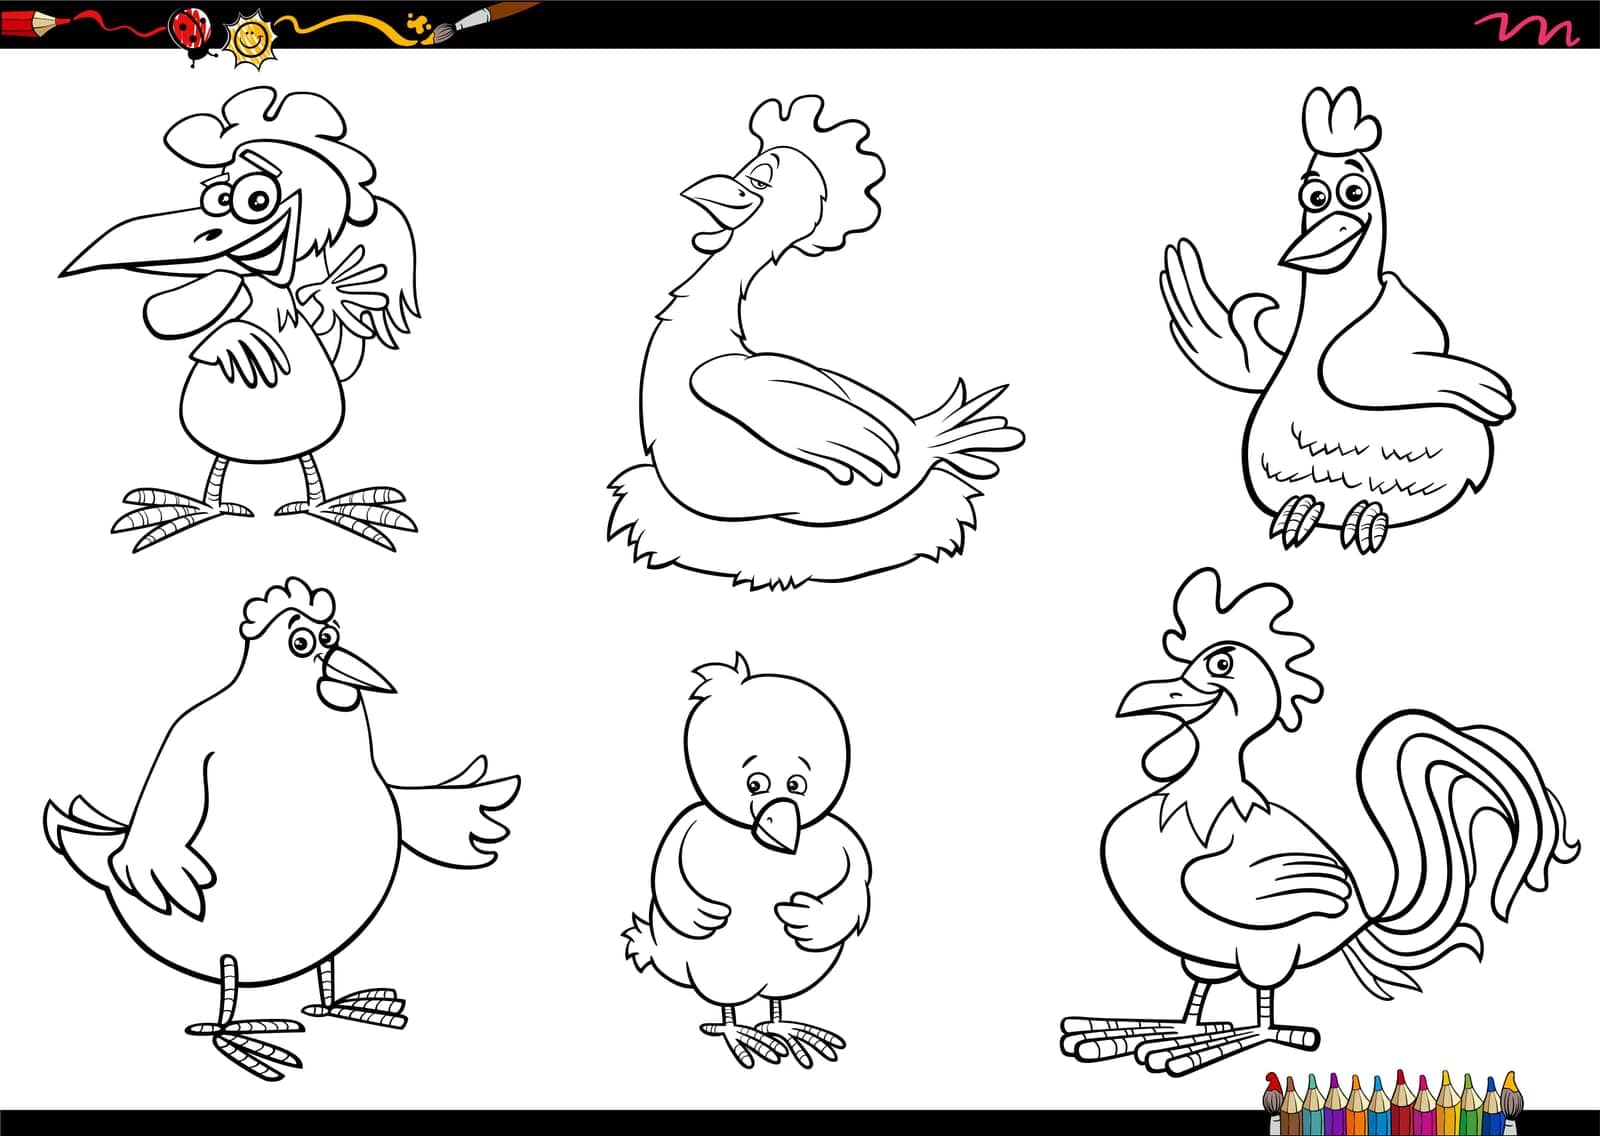 Black and white cartoon illustration of chicken birds farm animal characters set coloring page